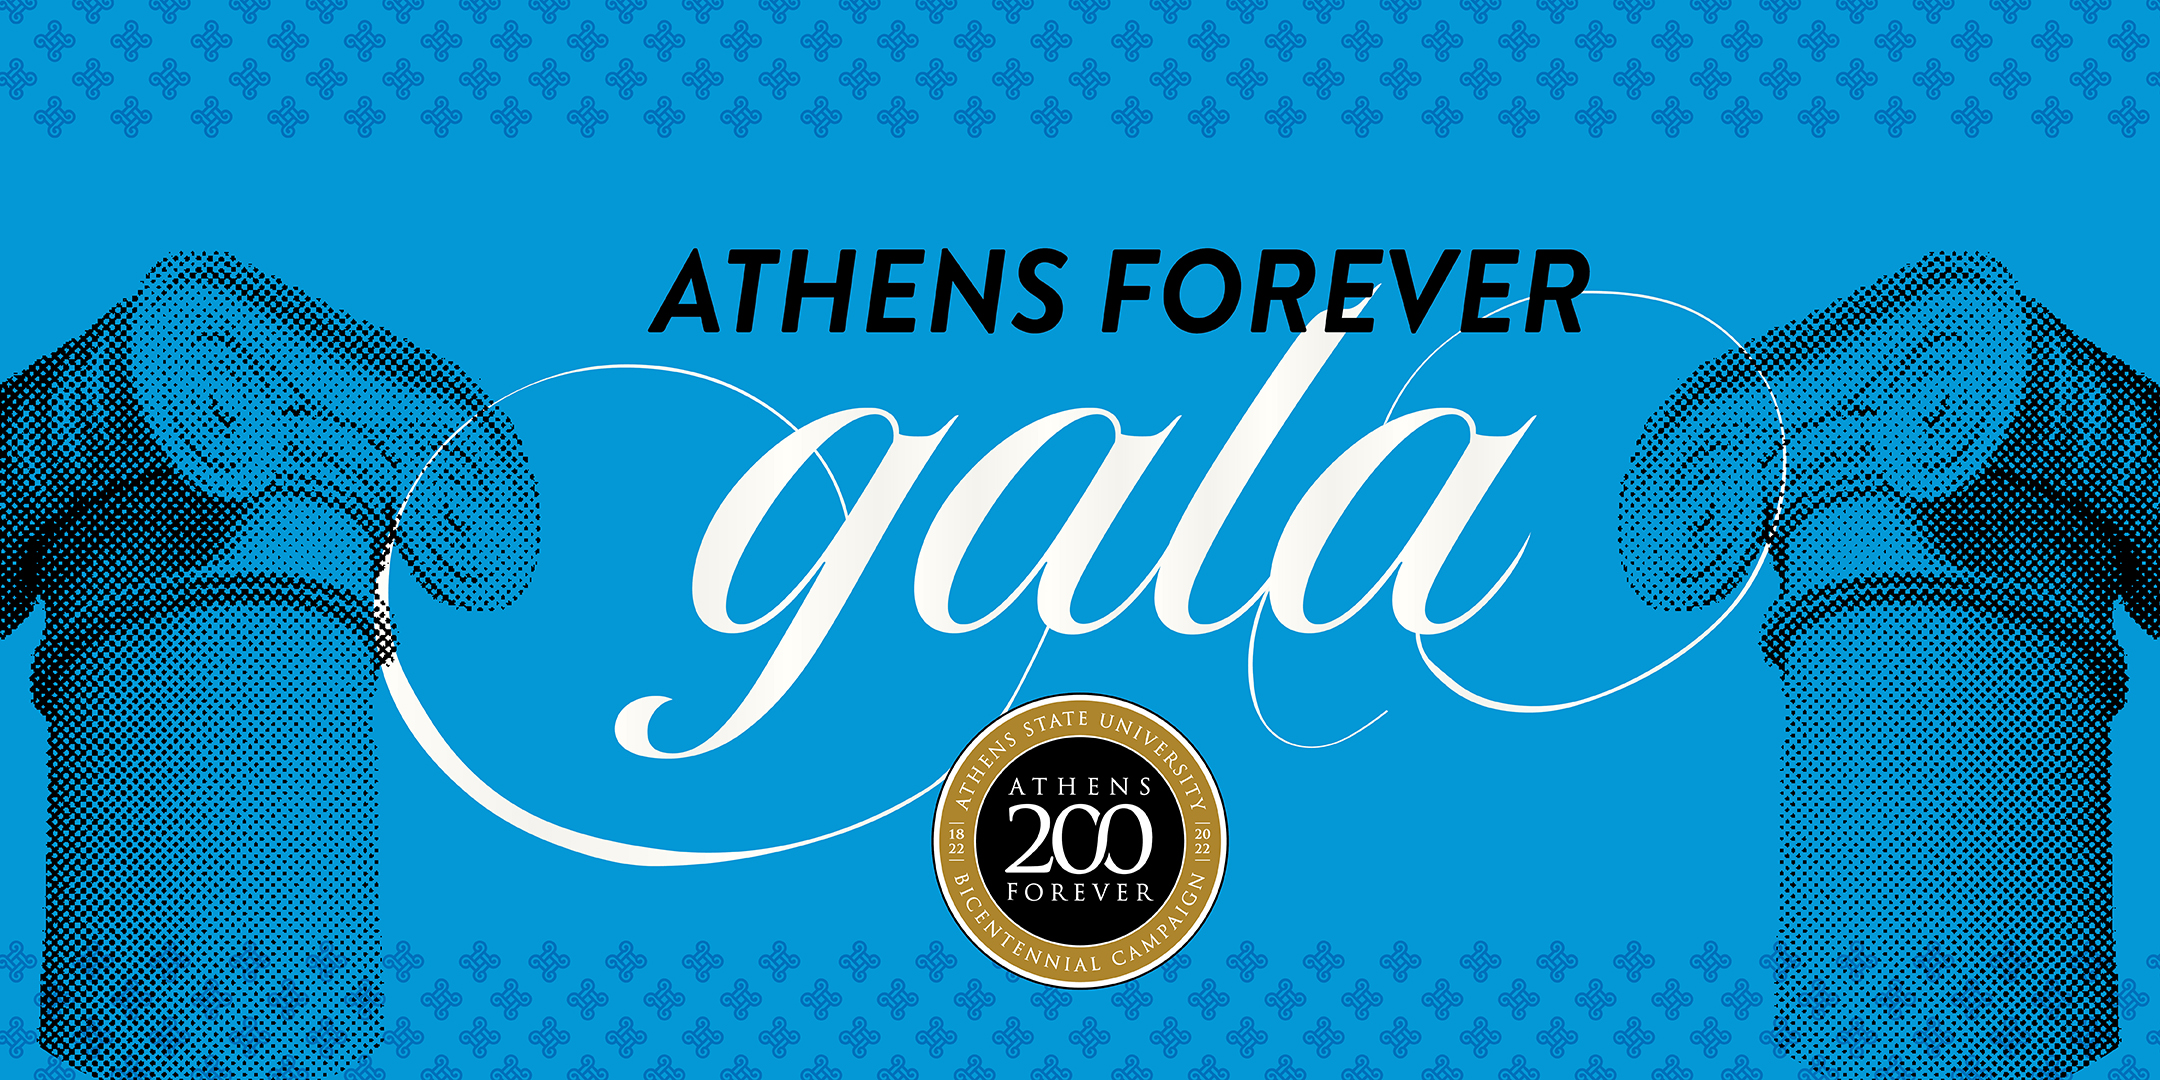 Athens Forever Gala